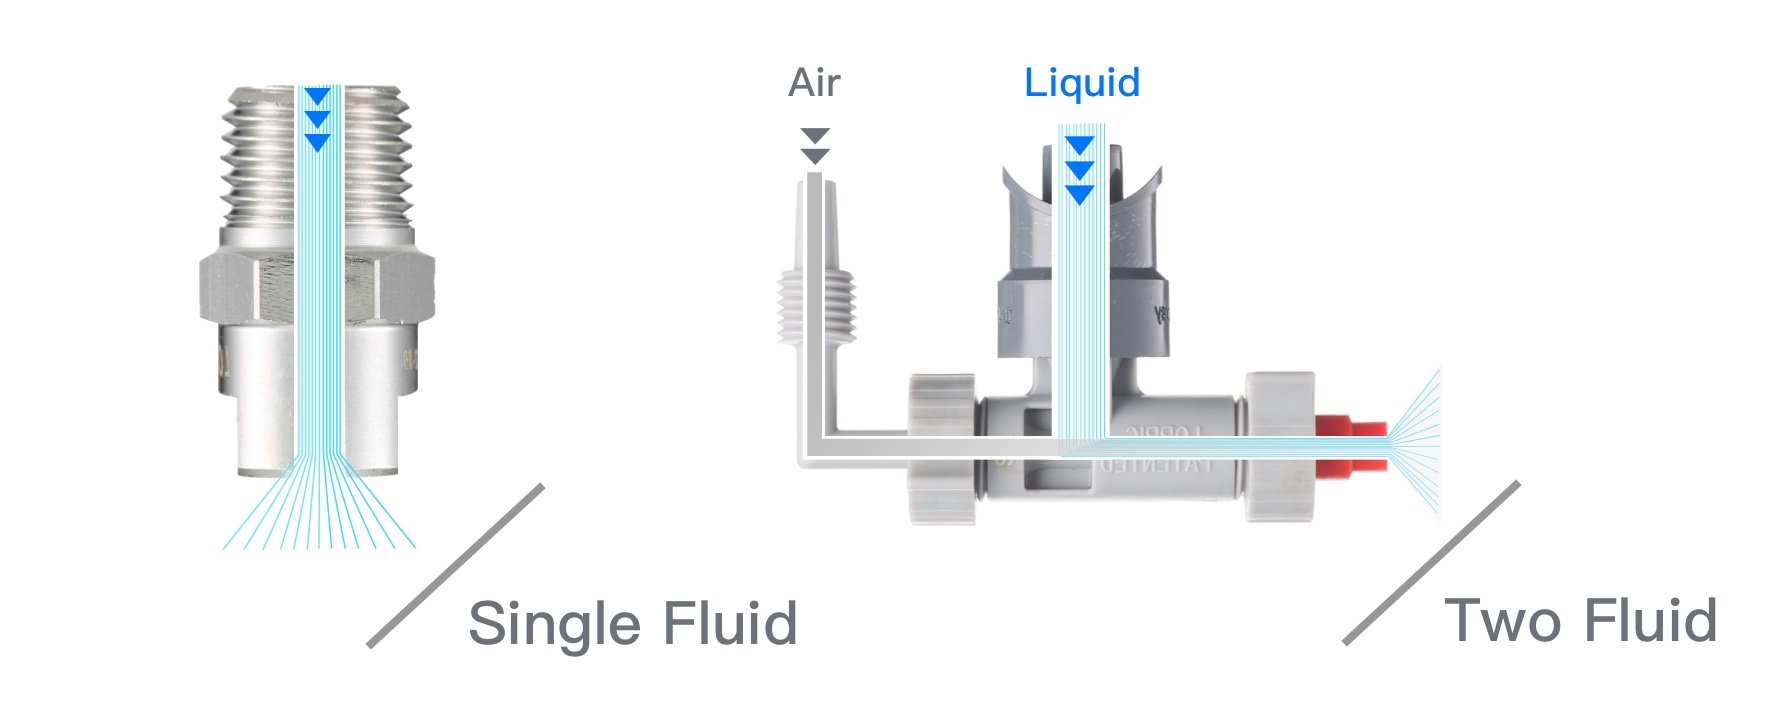 Identifying One-Fluid and Two-Fluid Nozzles